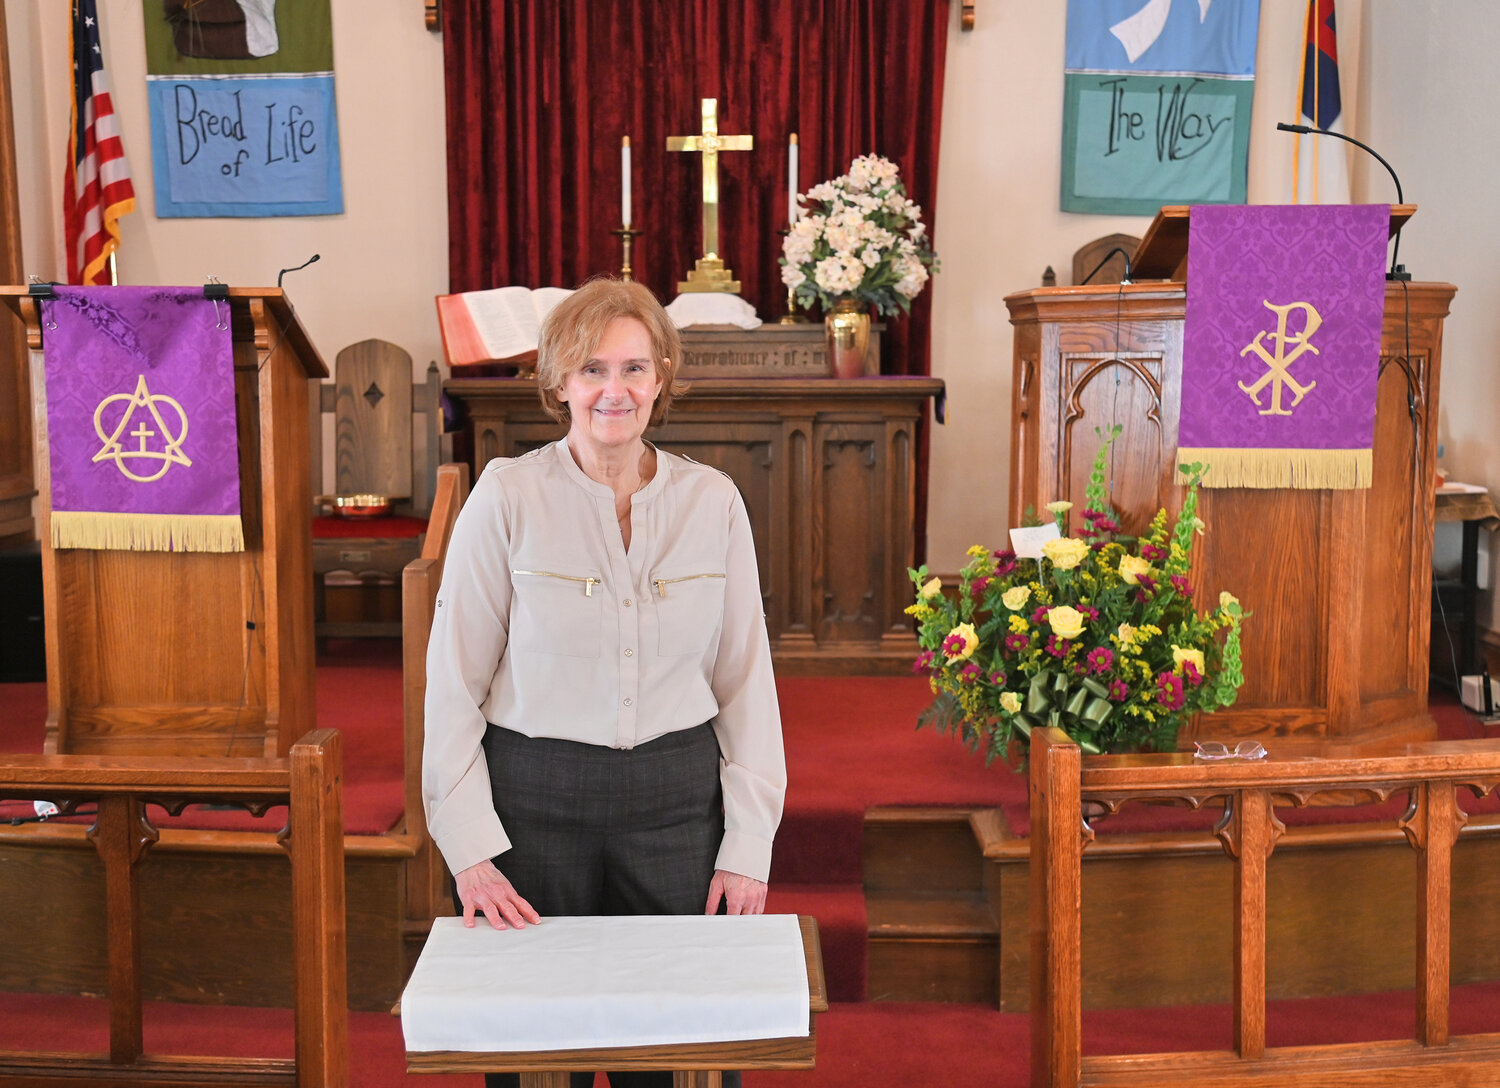 The Rev. Karen Marshall, pastor, stands before the alter of Trinity Church in Rome, 215 W. Court St. The church will celebrate its 175th anniversary with a three-day celebration in April.